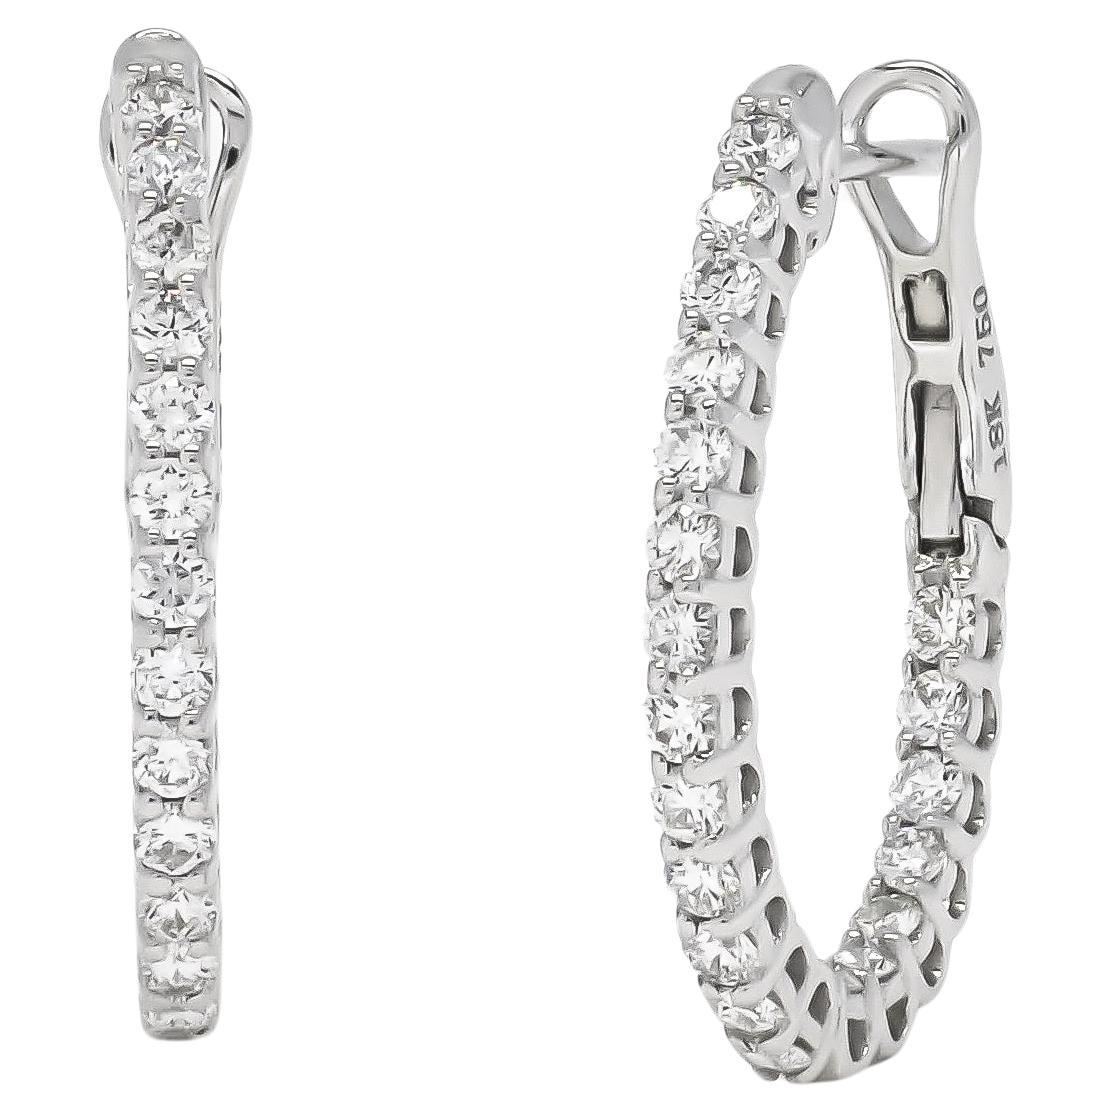 Natural Diamond 1.02 Carats 18KT White Gold 'In and out' Hoop Earrings